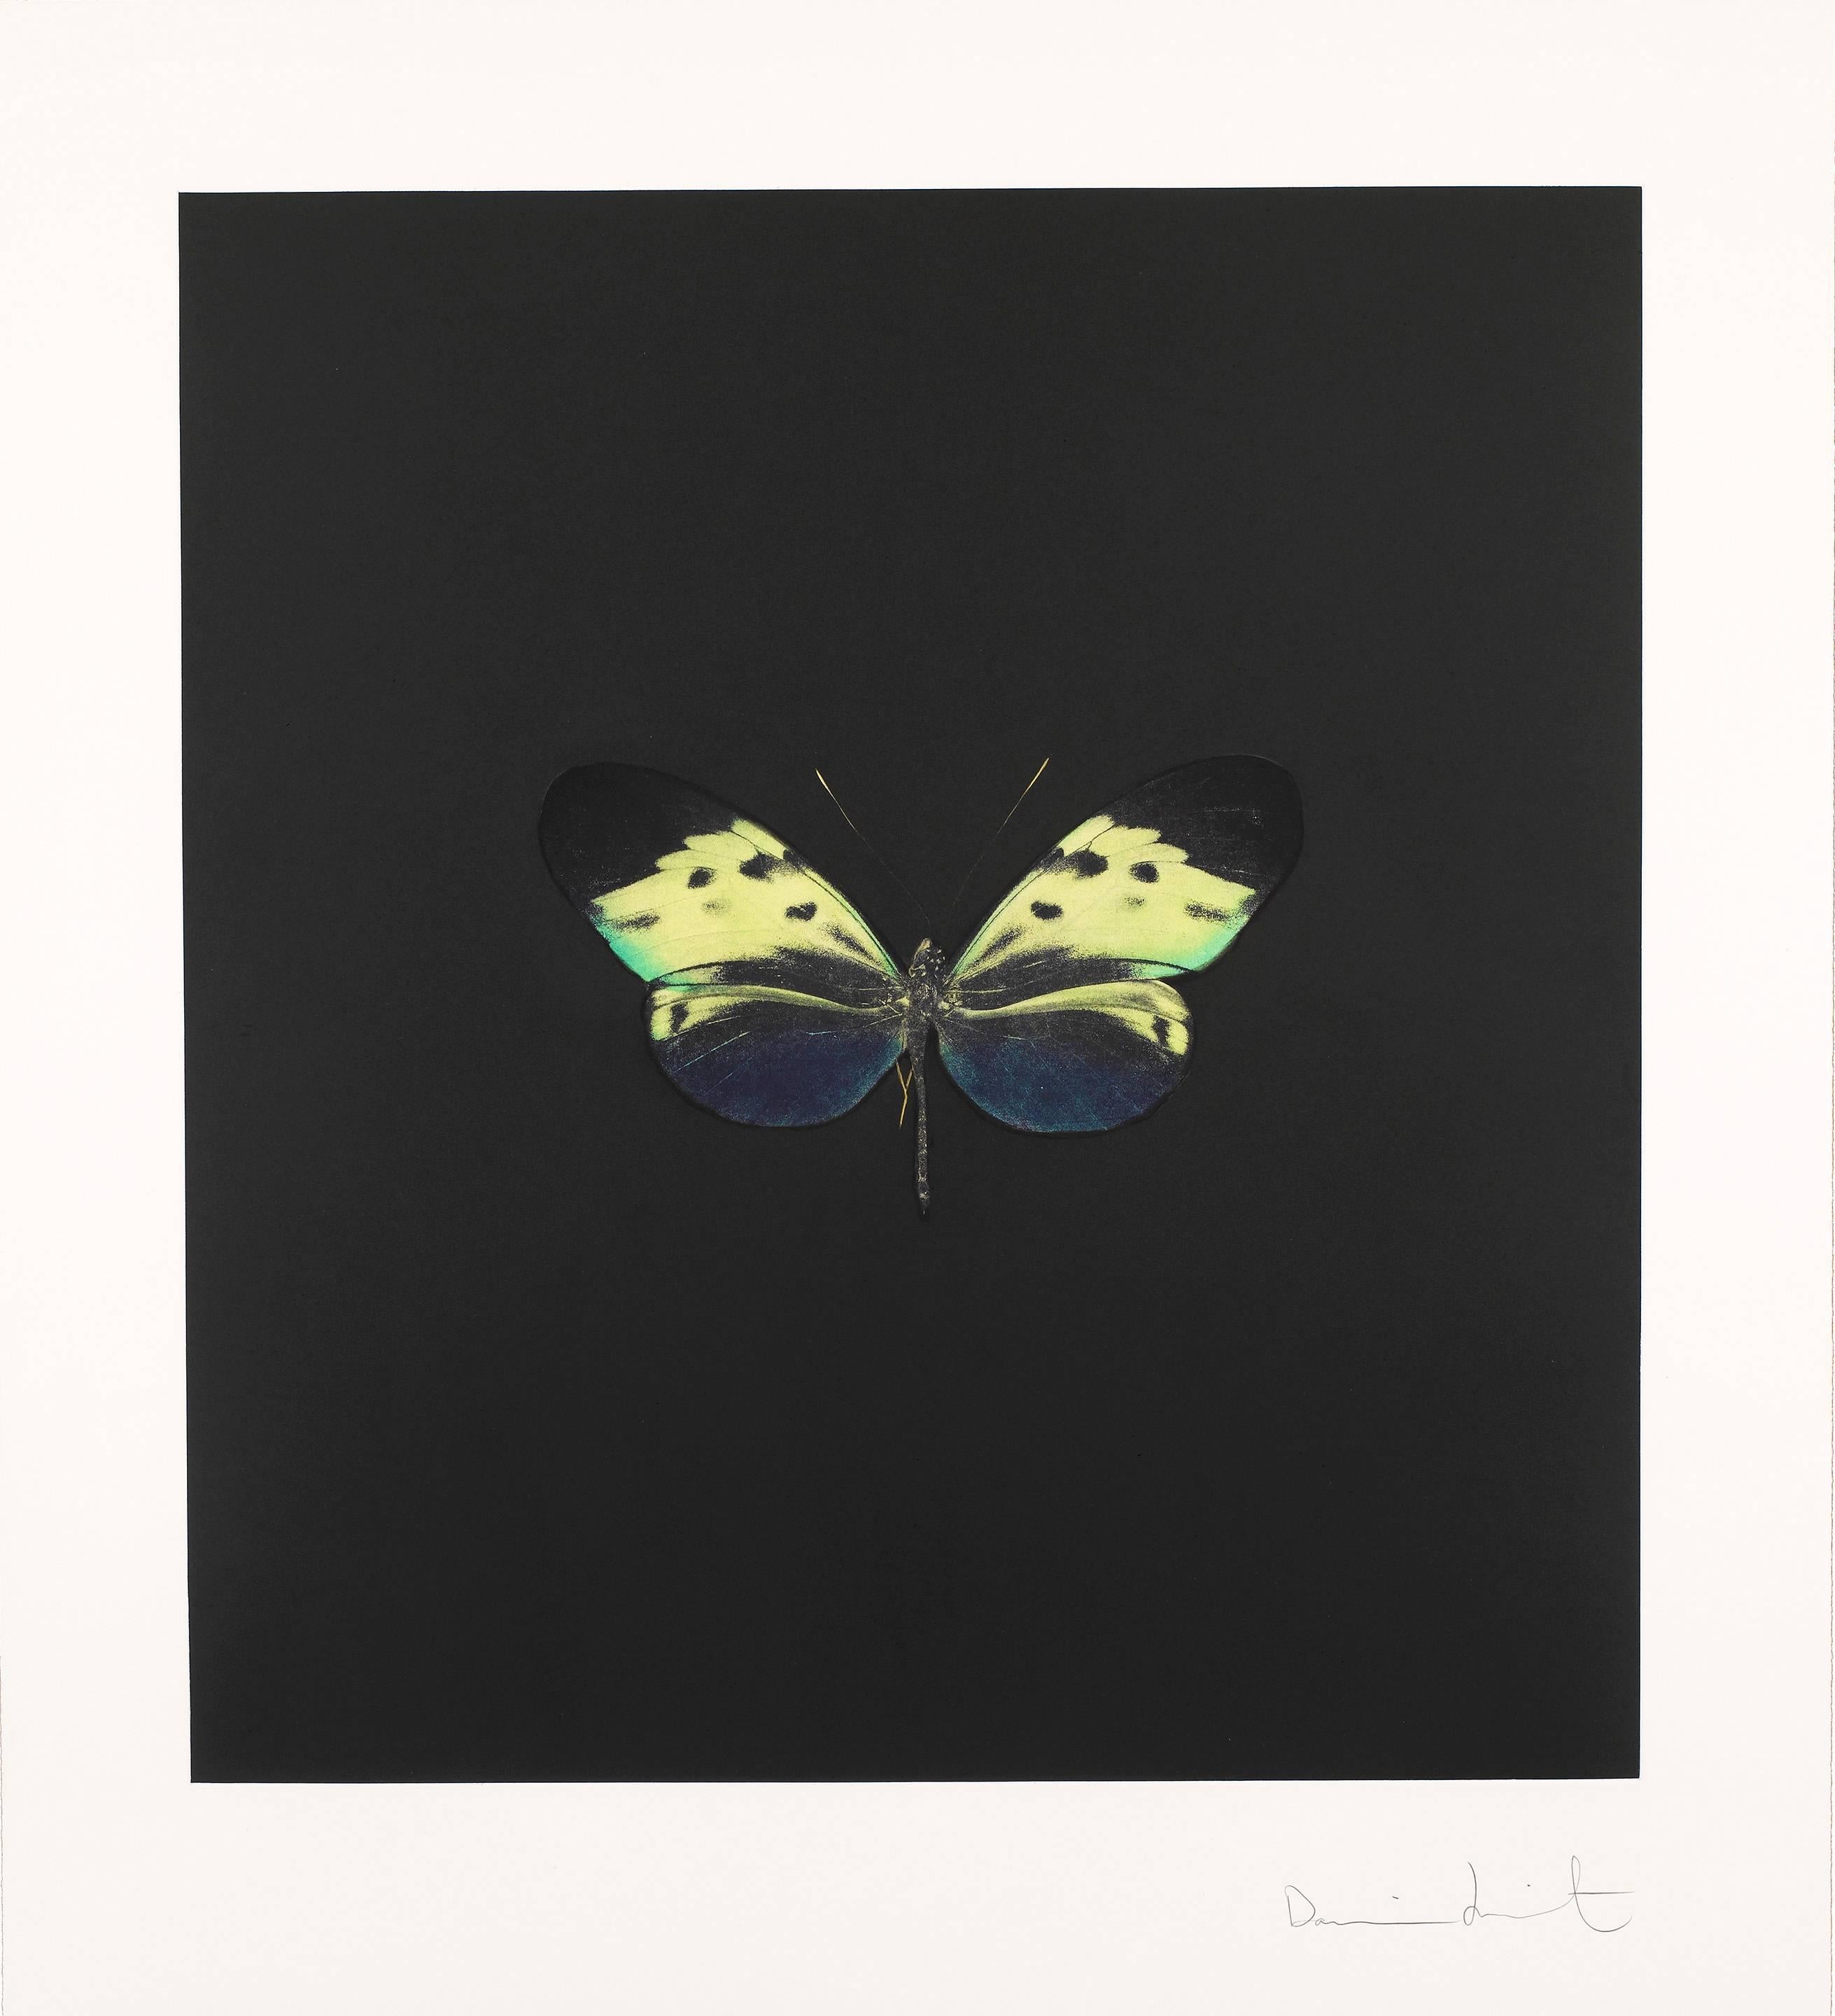 Souls on Jacob's Ladder (04) - Print by Damien Hirst